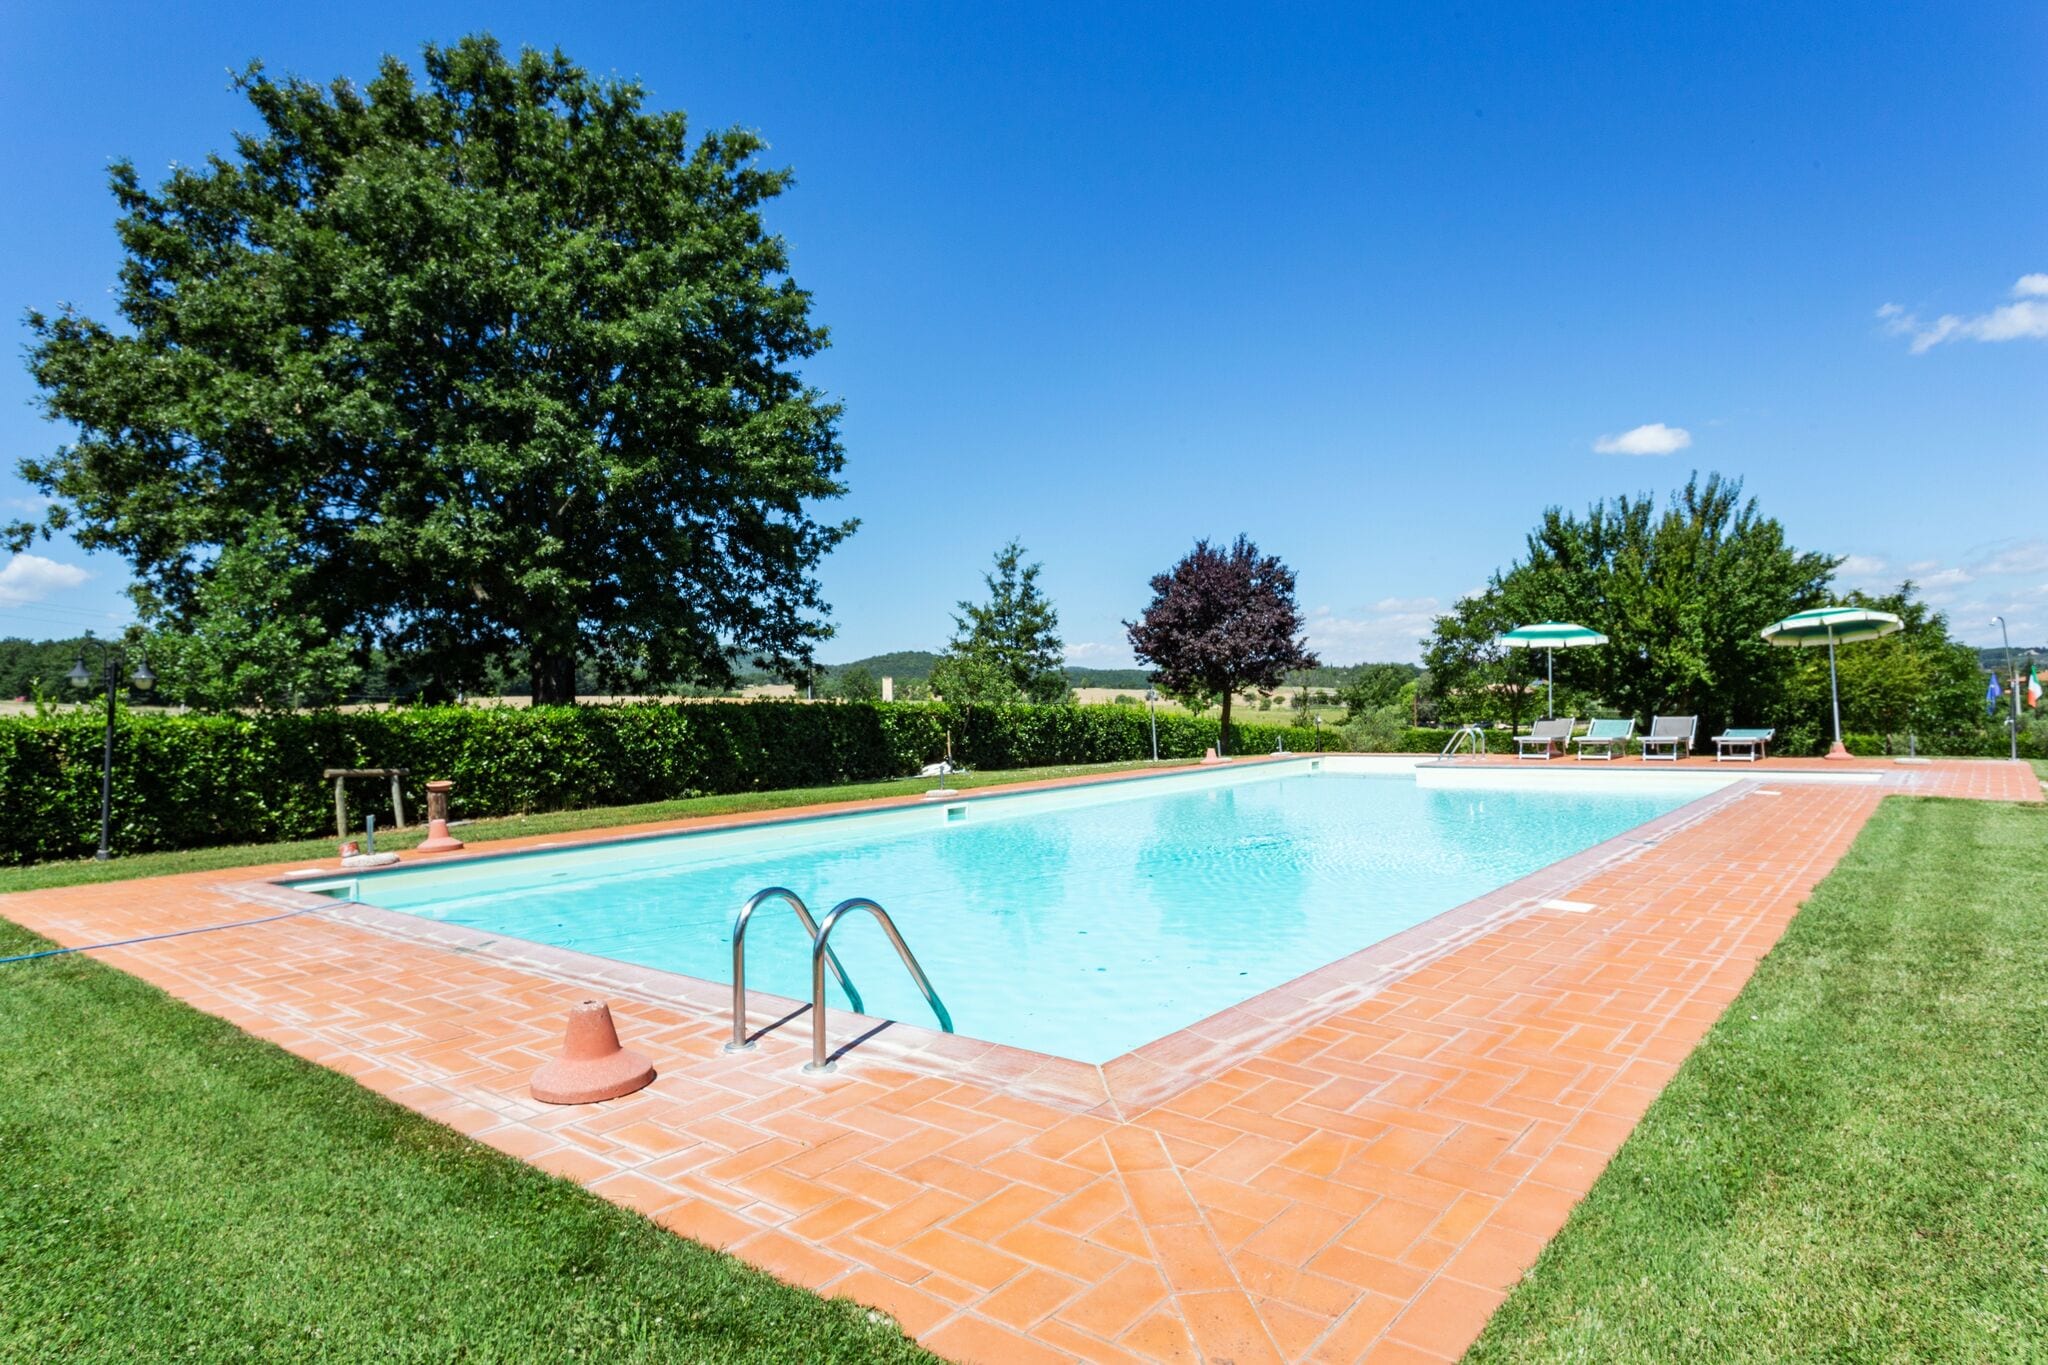 Vacation home in Tuscany divided into apartments with swimming pool